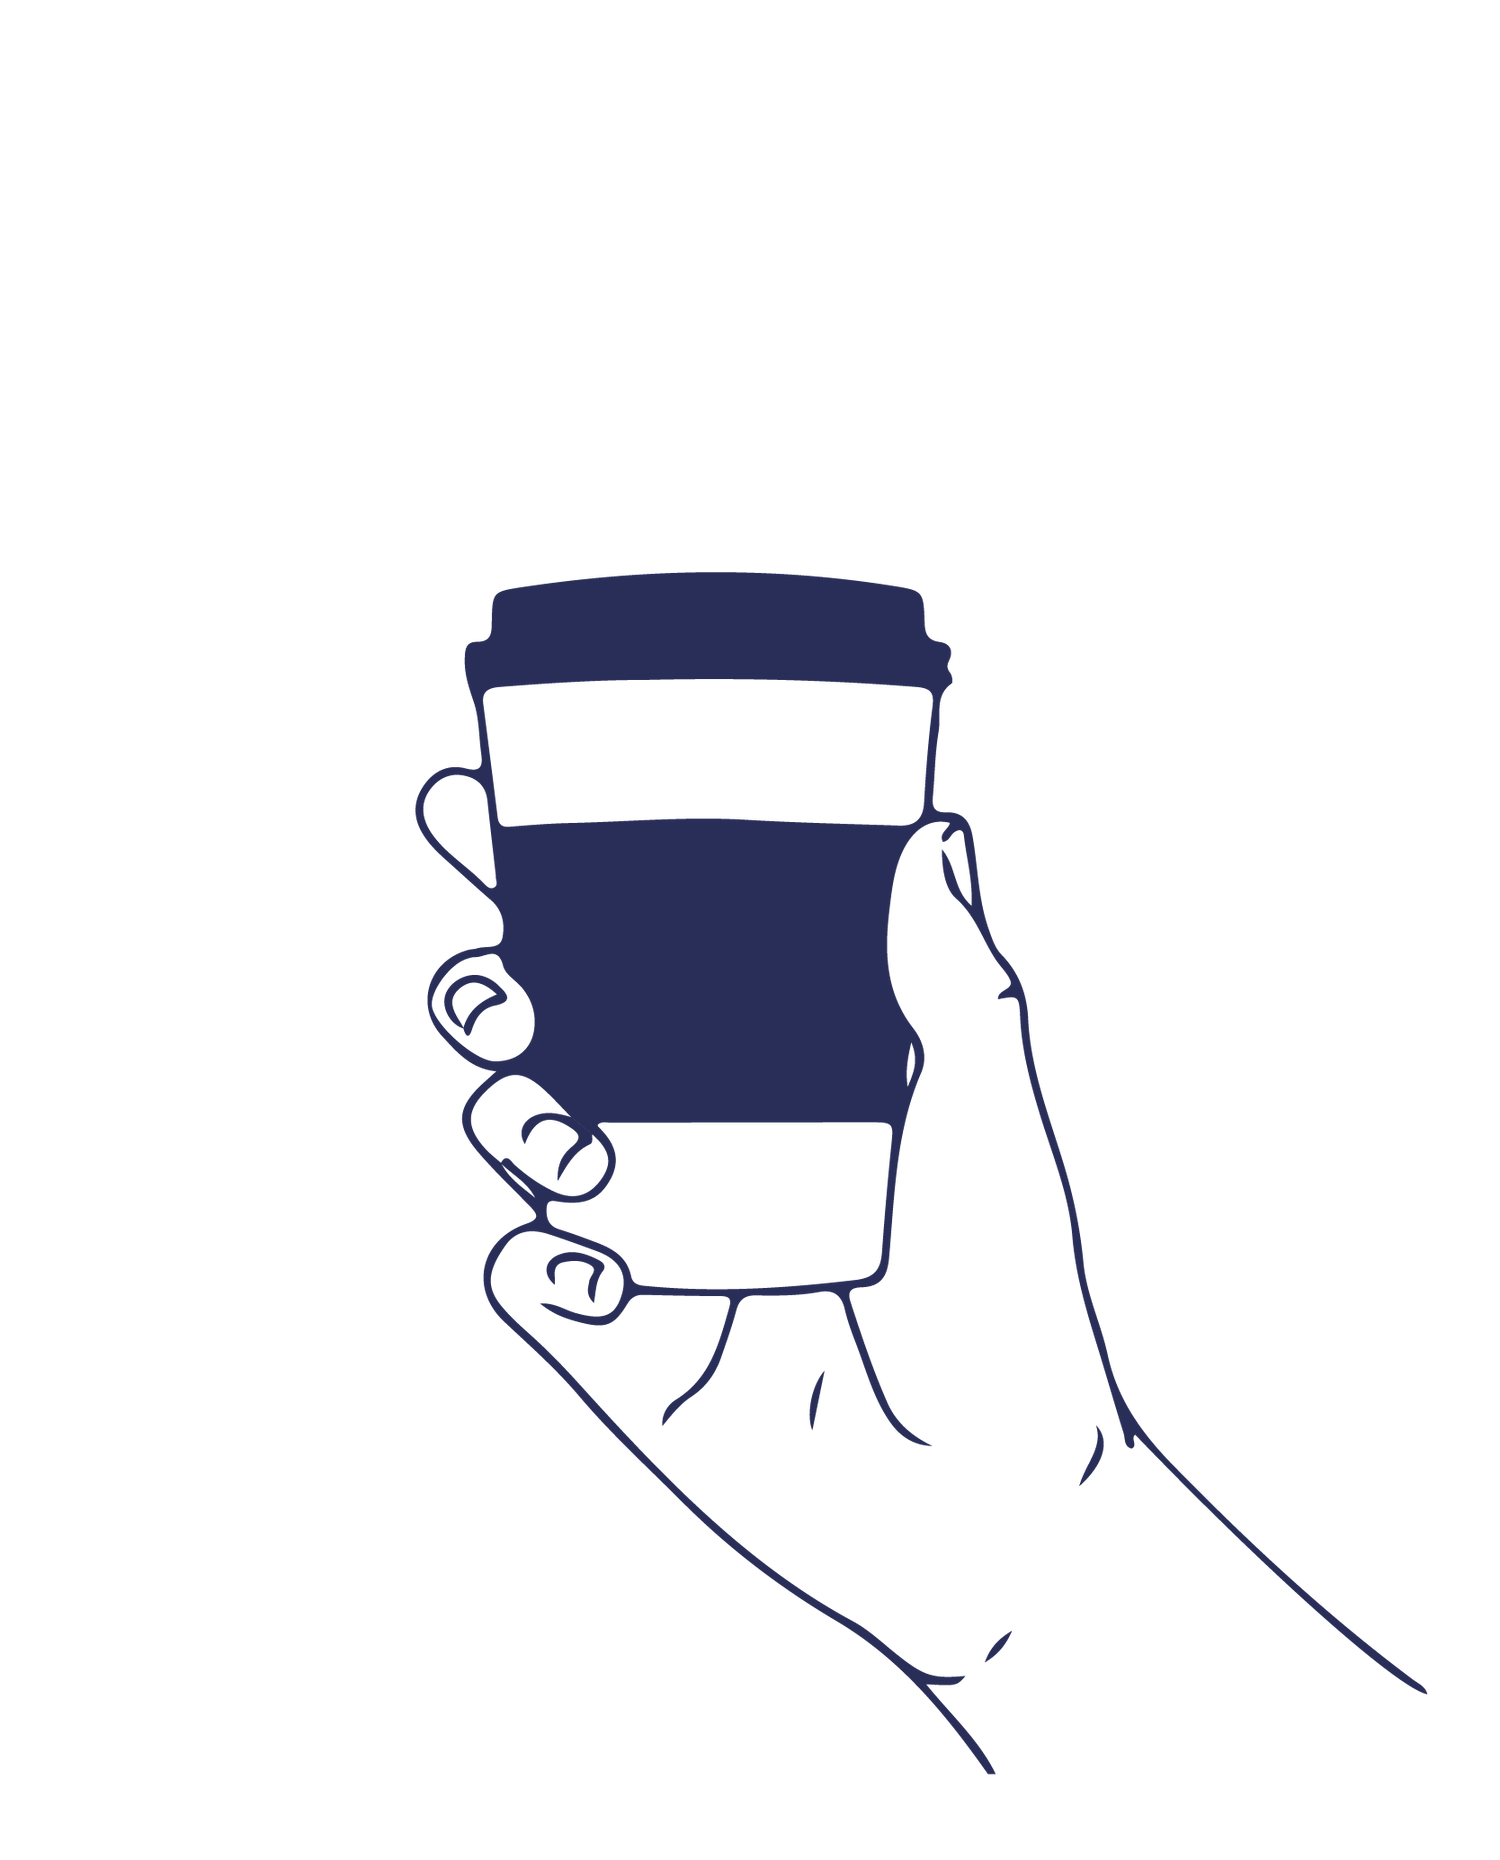 Illustration of hand holding takeaway coffee cup